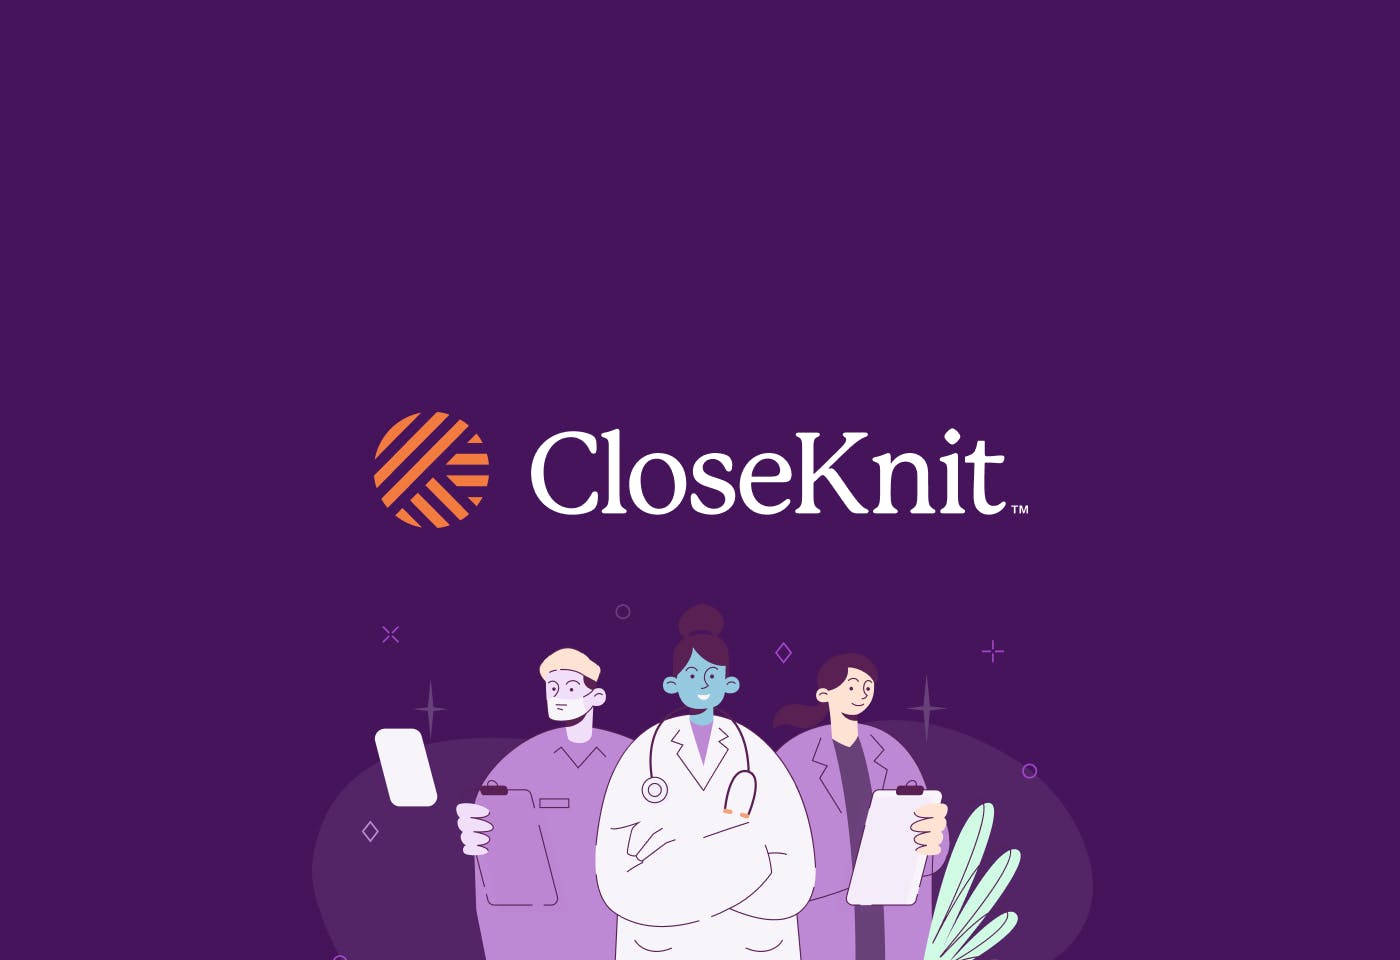 CloseKnit logo is centered on a purple background above an illustration of medical professionals.